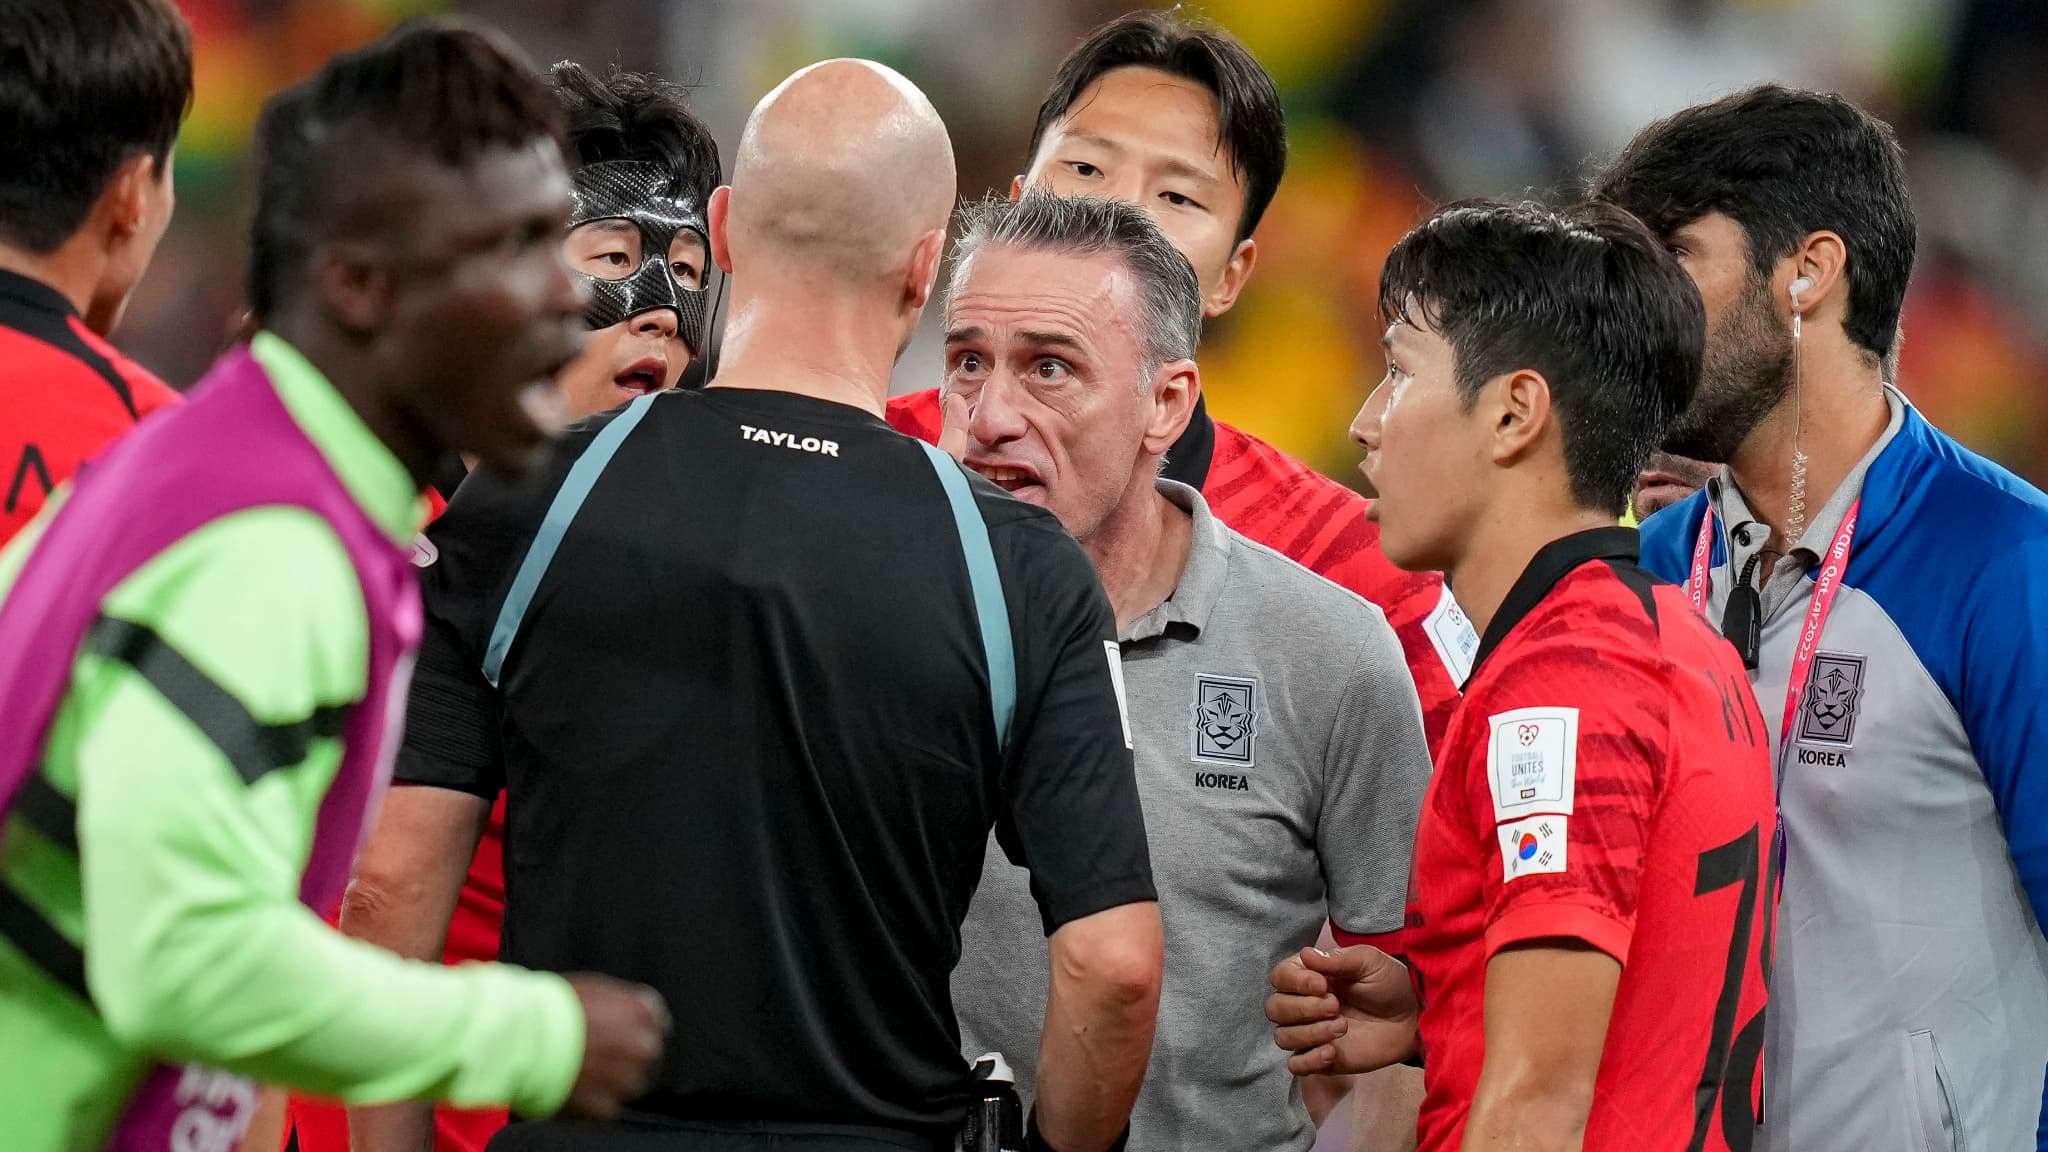 Huge anger of Paulo Bento who was disqualified at the end of the match for protesting